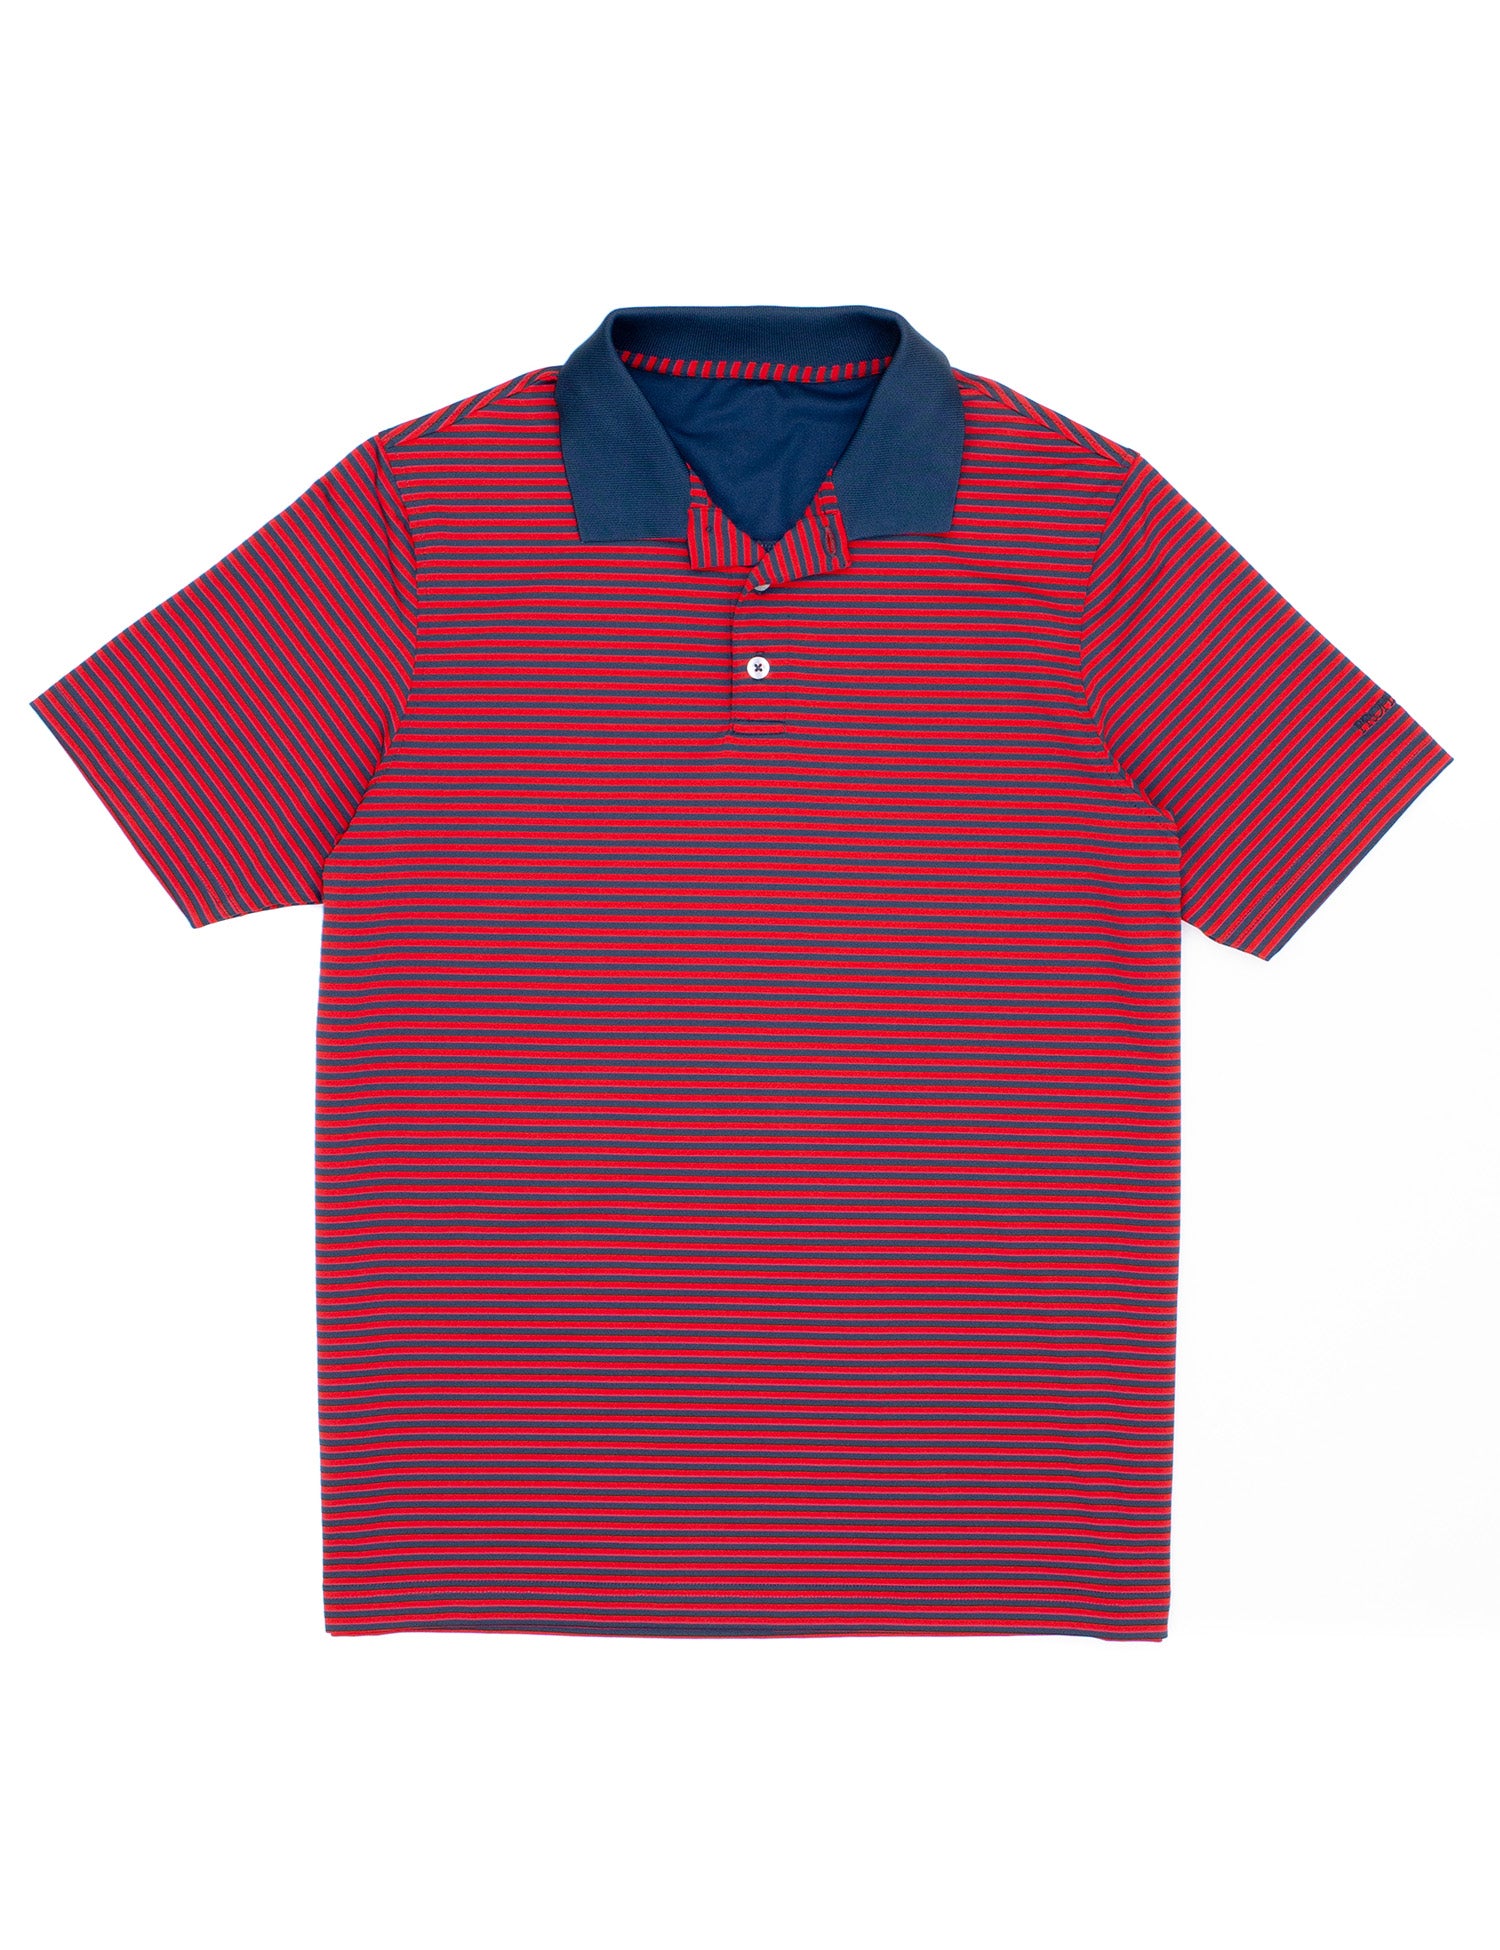 Men's Polos - Properly Tied